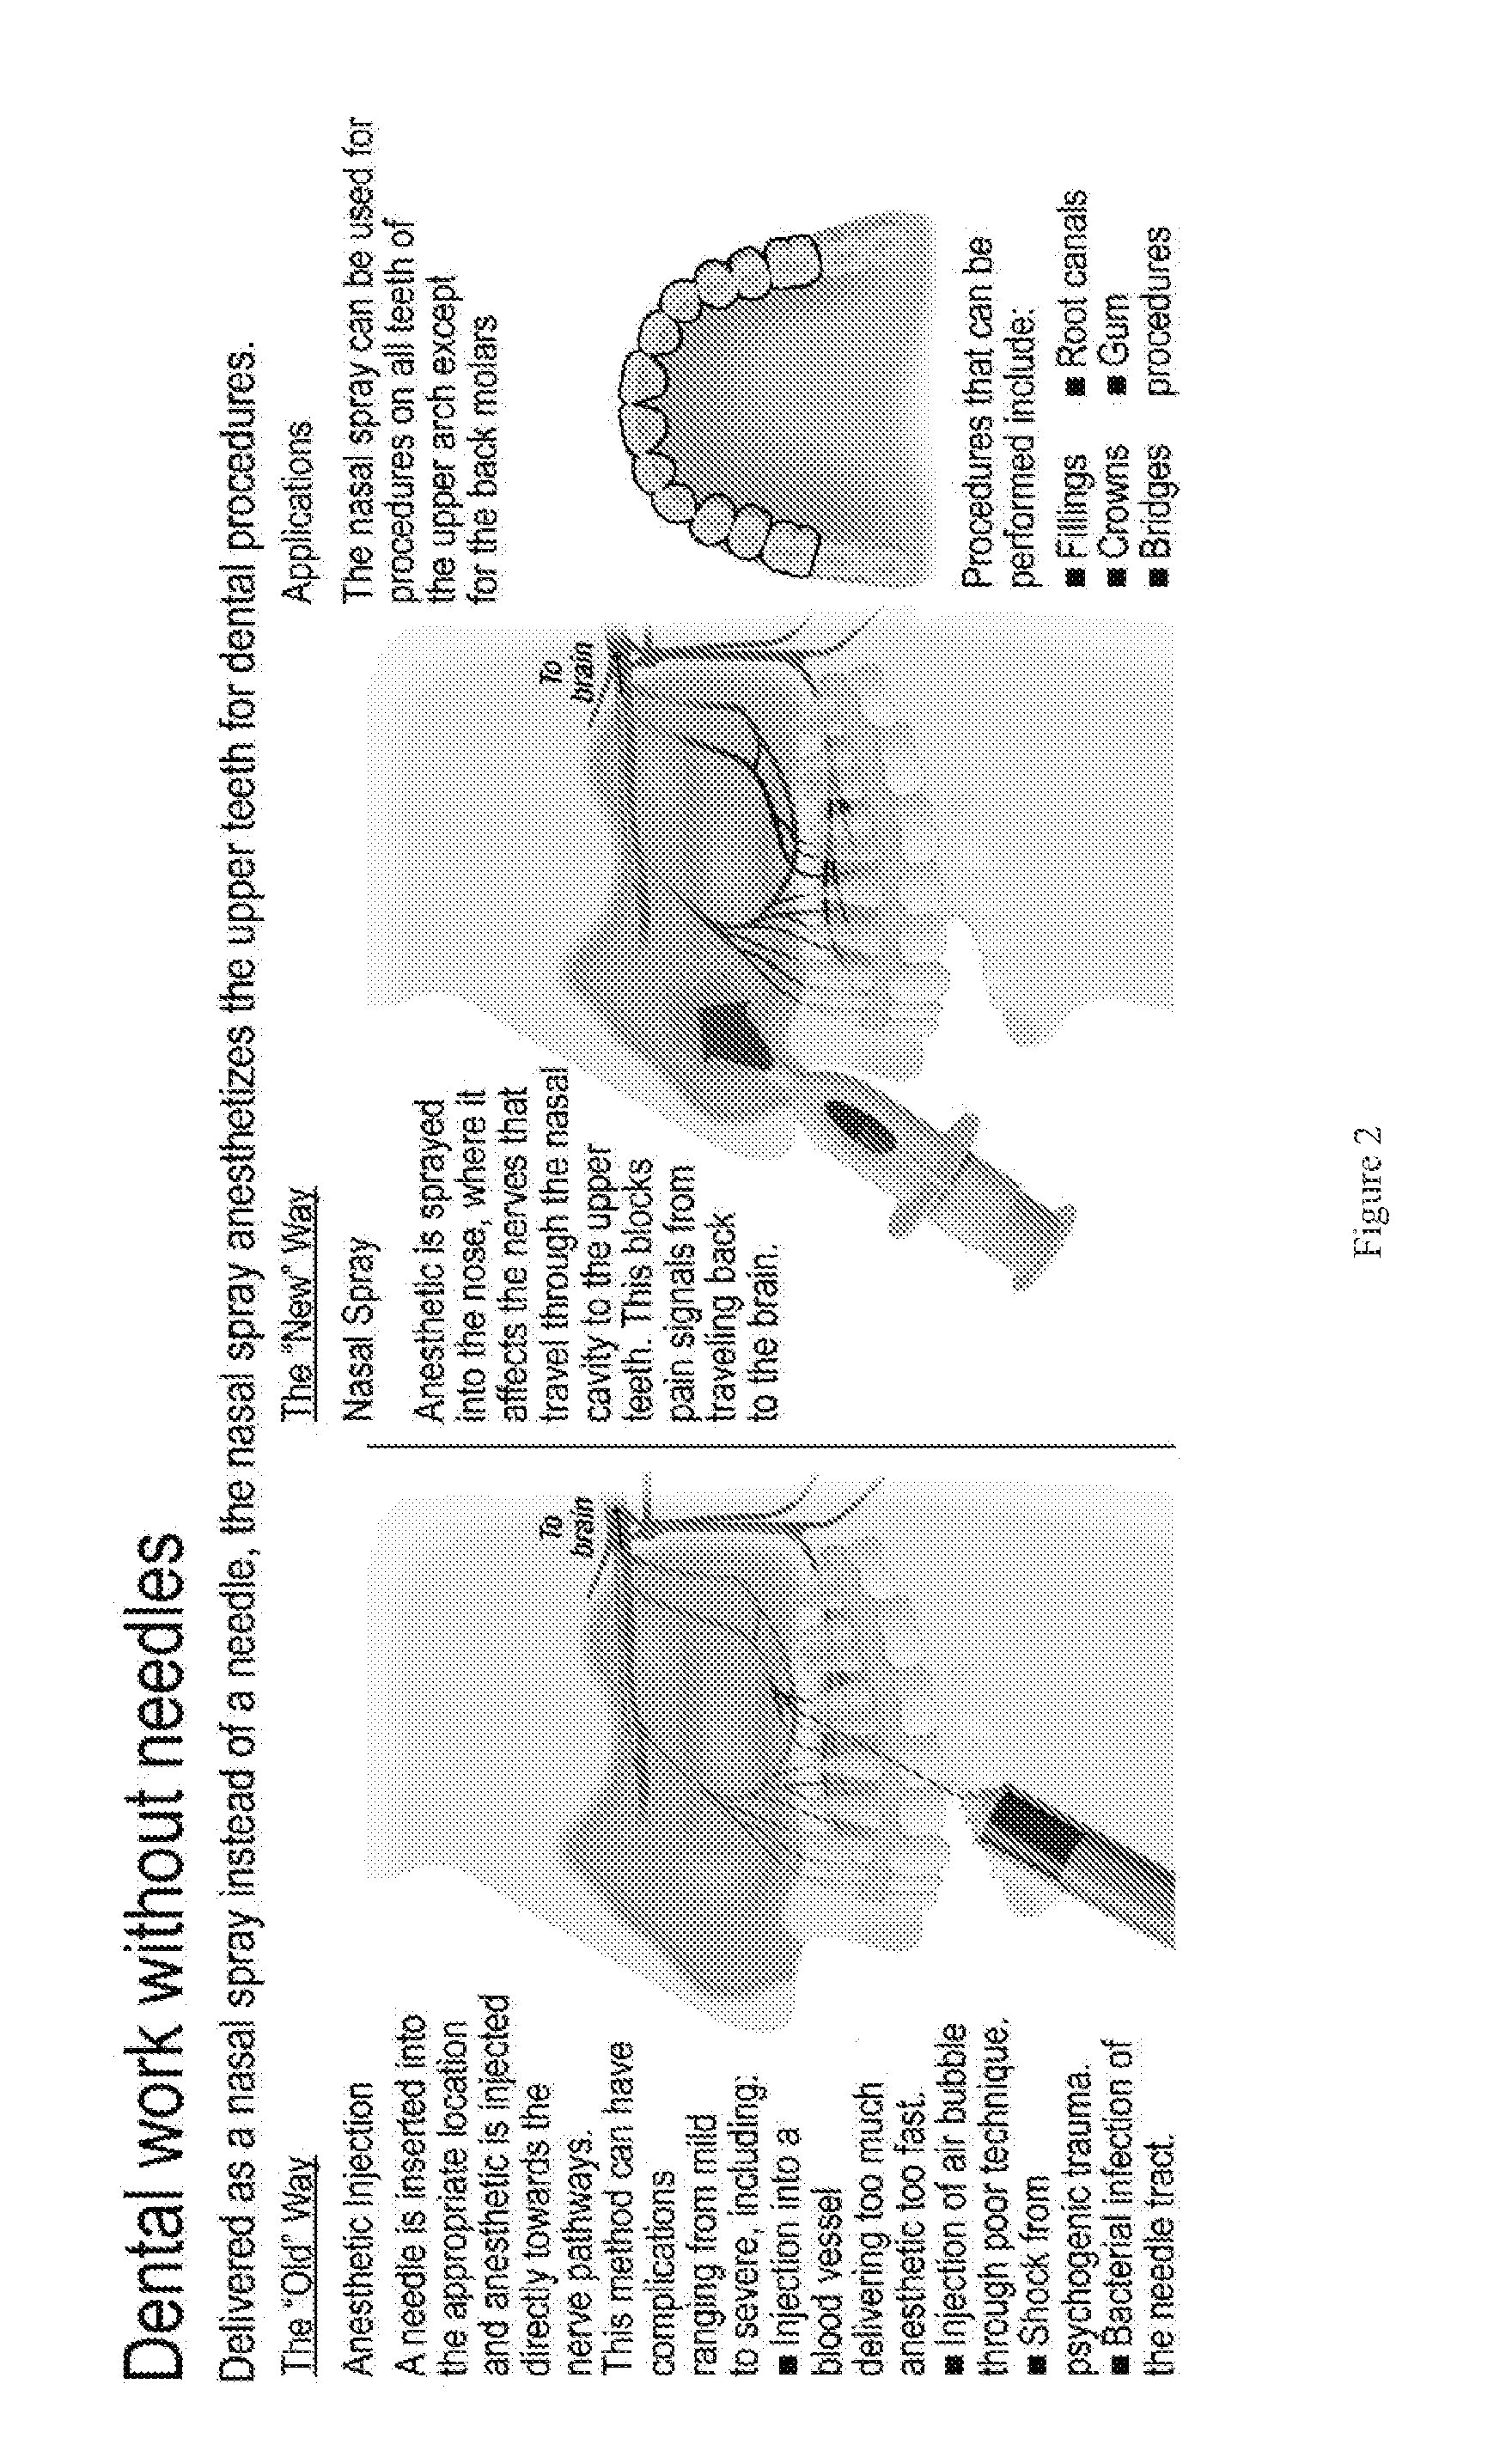 Dental anesthetic comprising tetracaine and a vasoconstrictor for intranasal administration